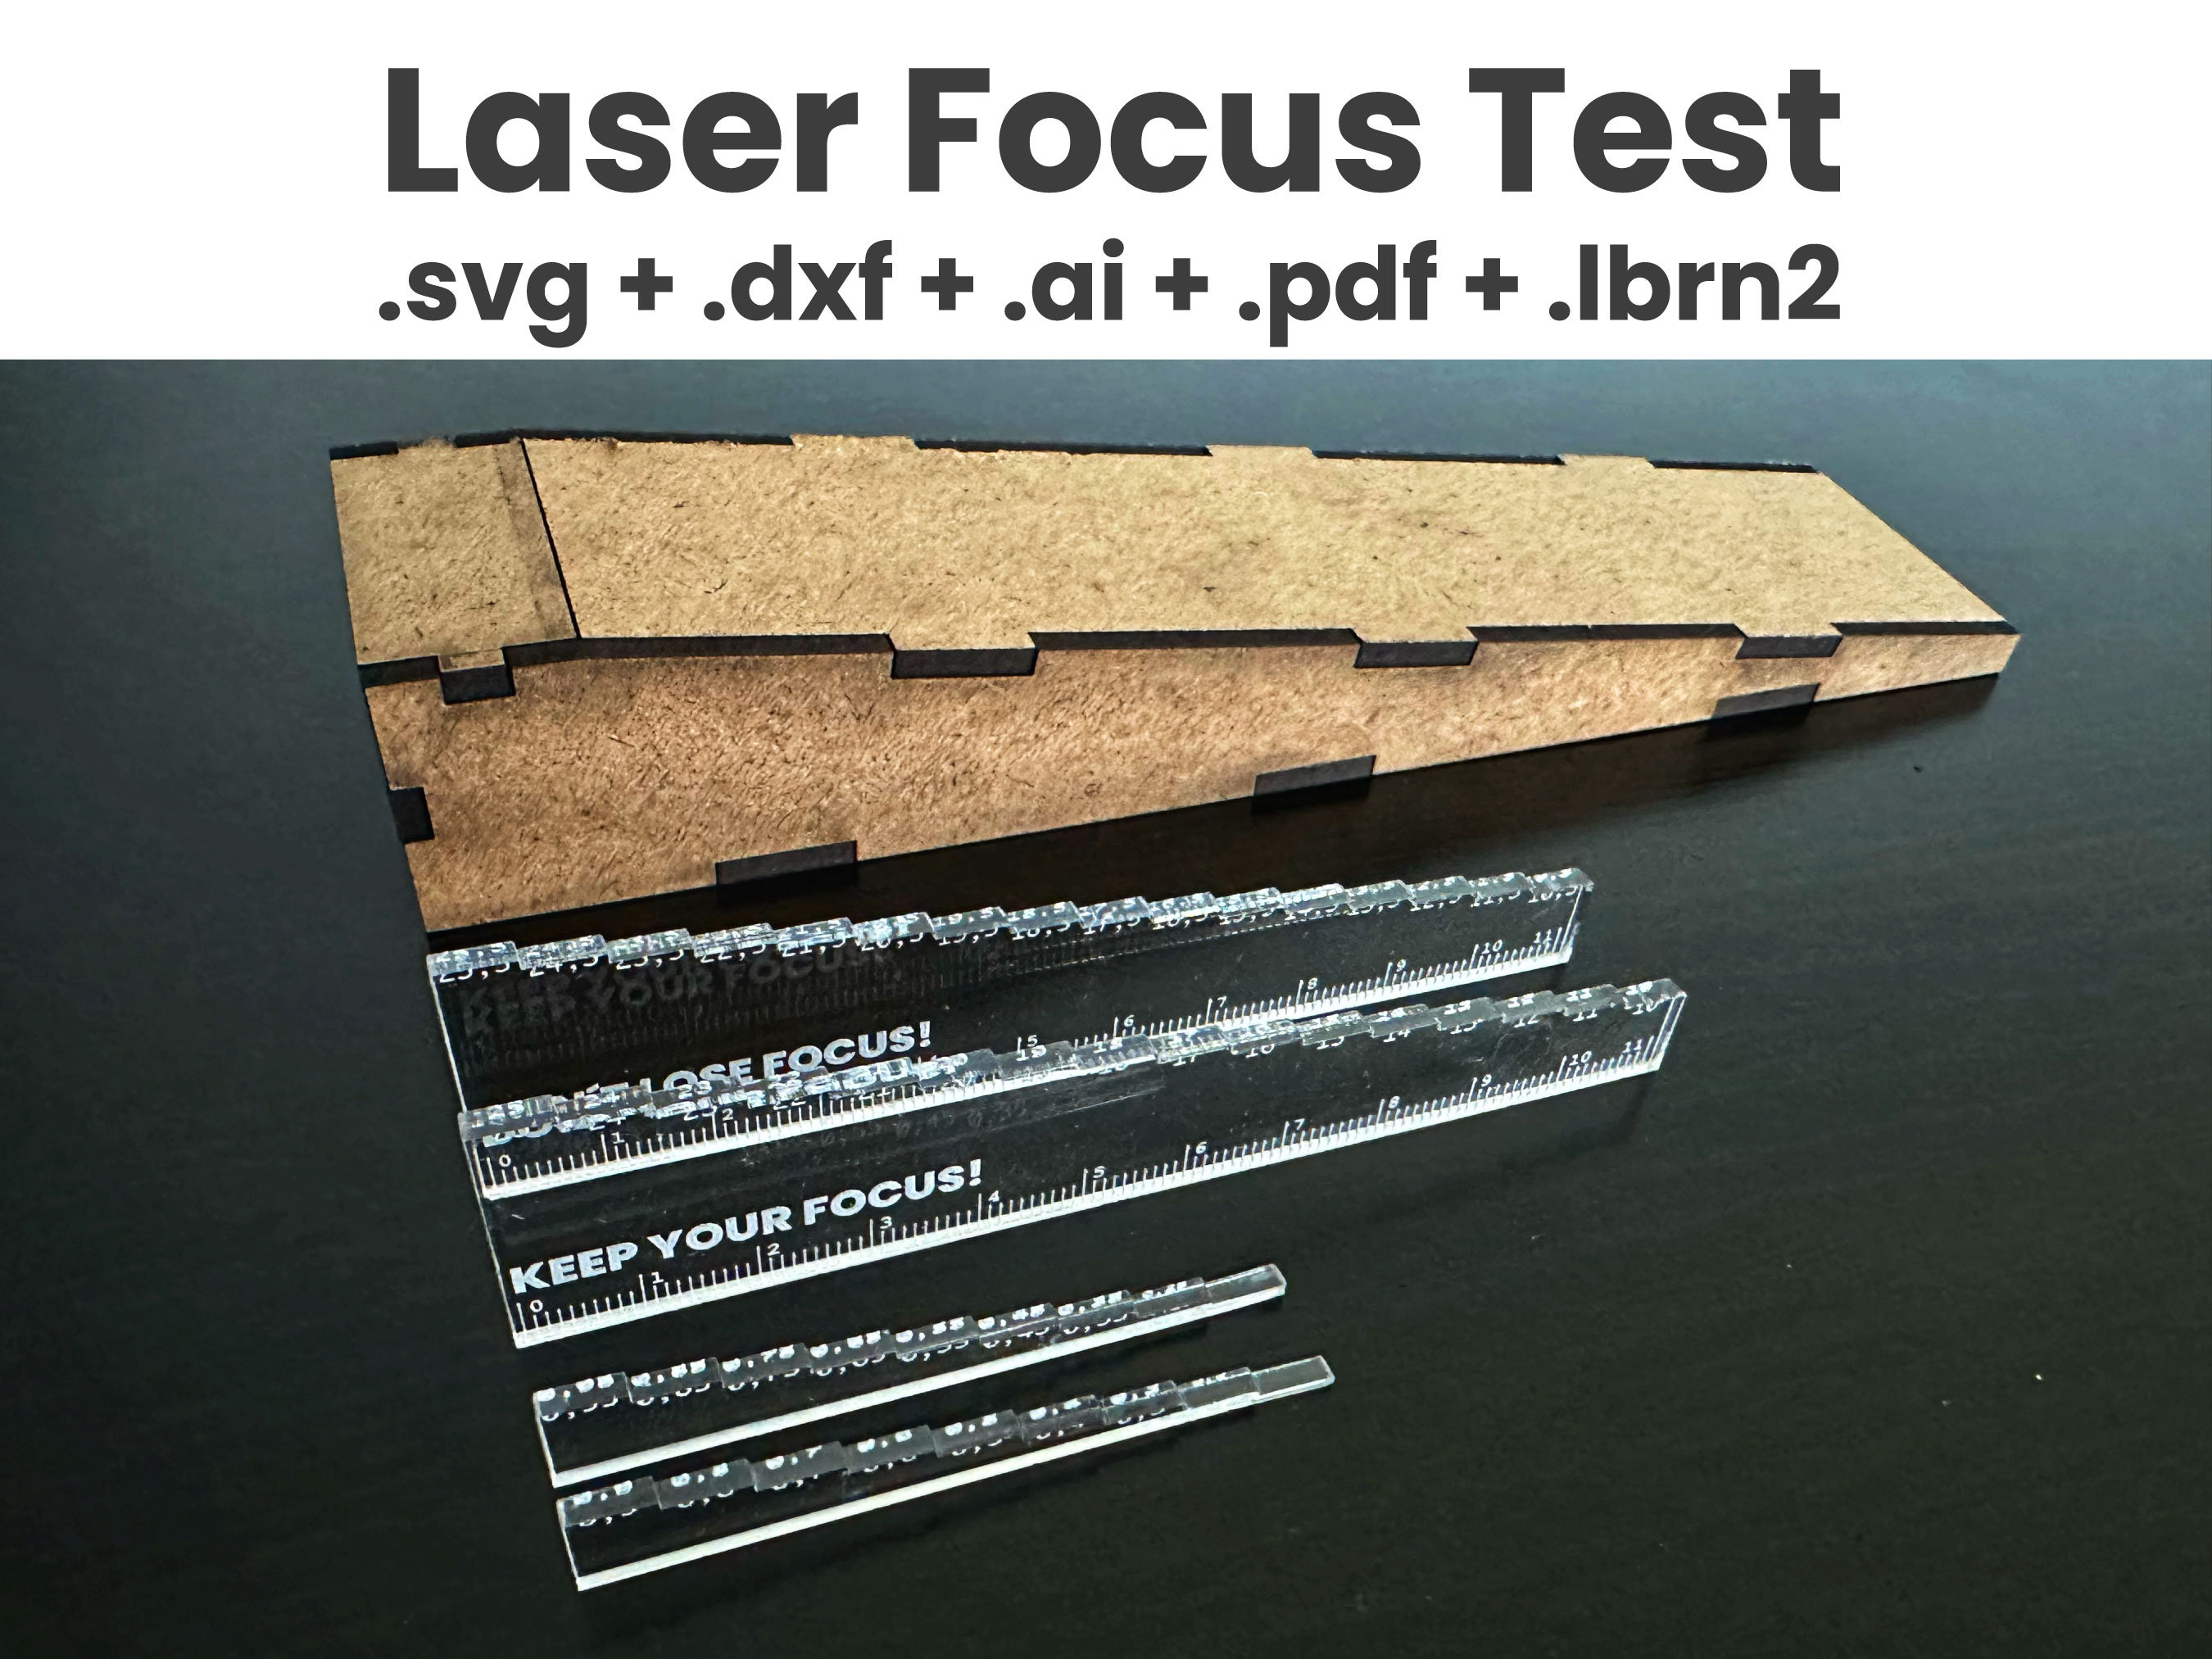 Rev Up Your Laser Engraving Game with the OMTECH Polar Laser